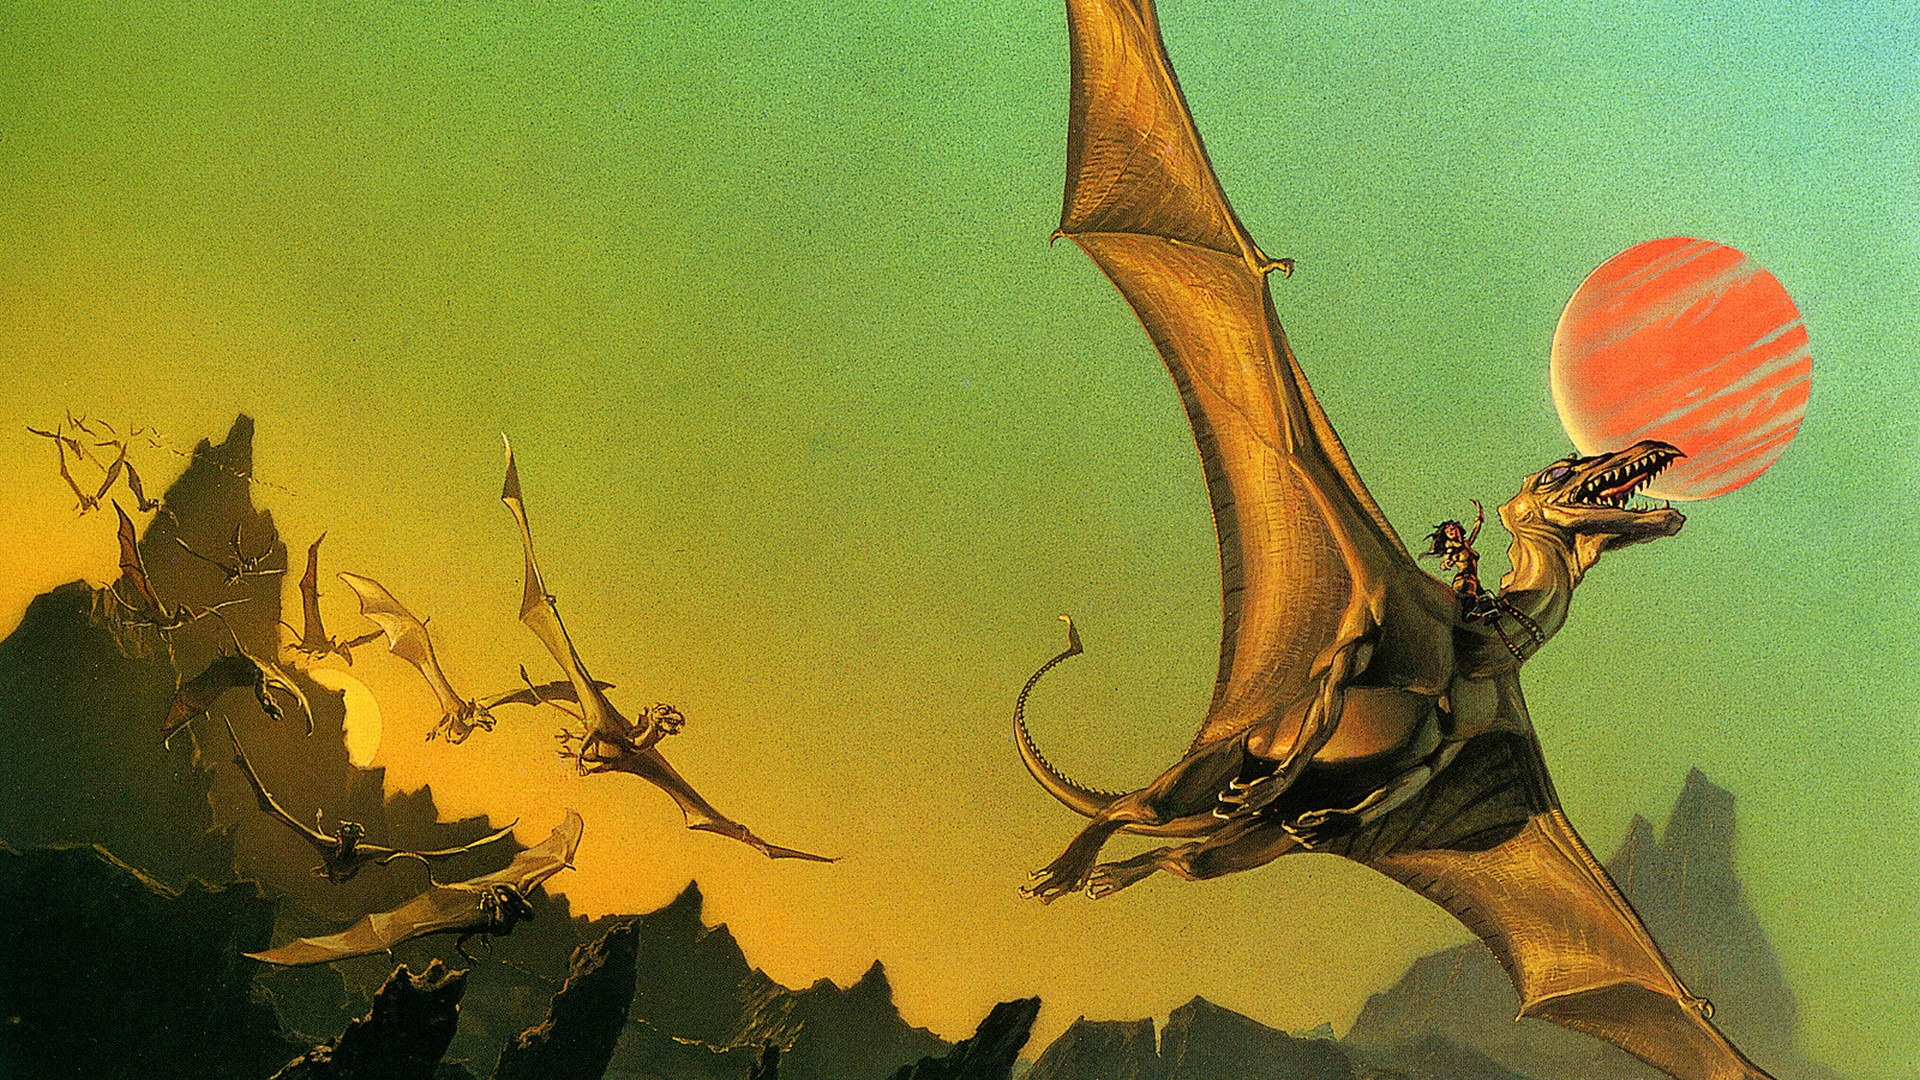 the dragon riders of pern